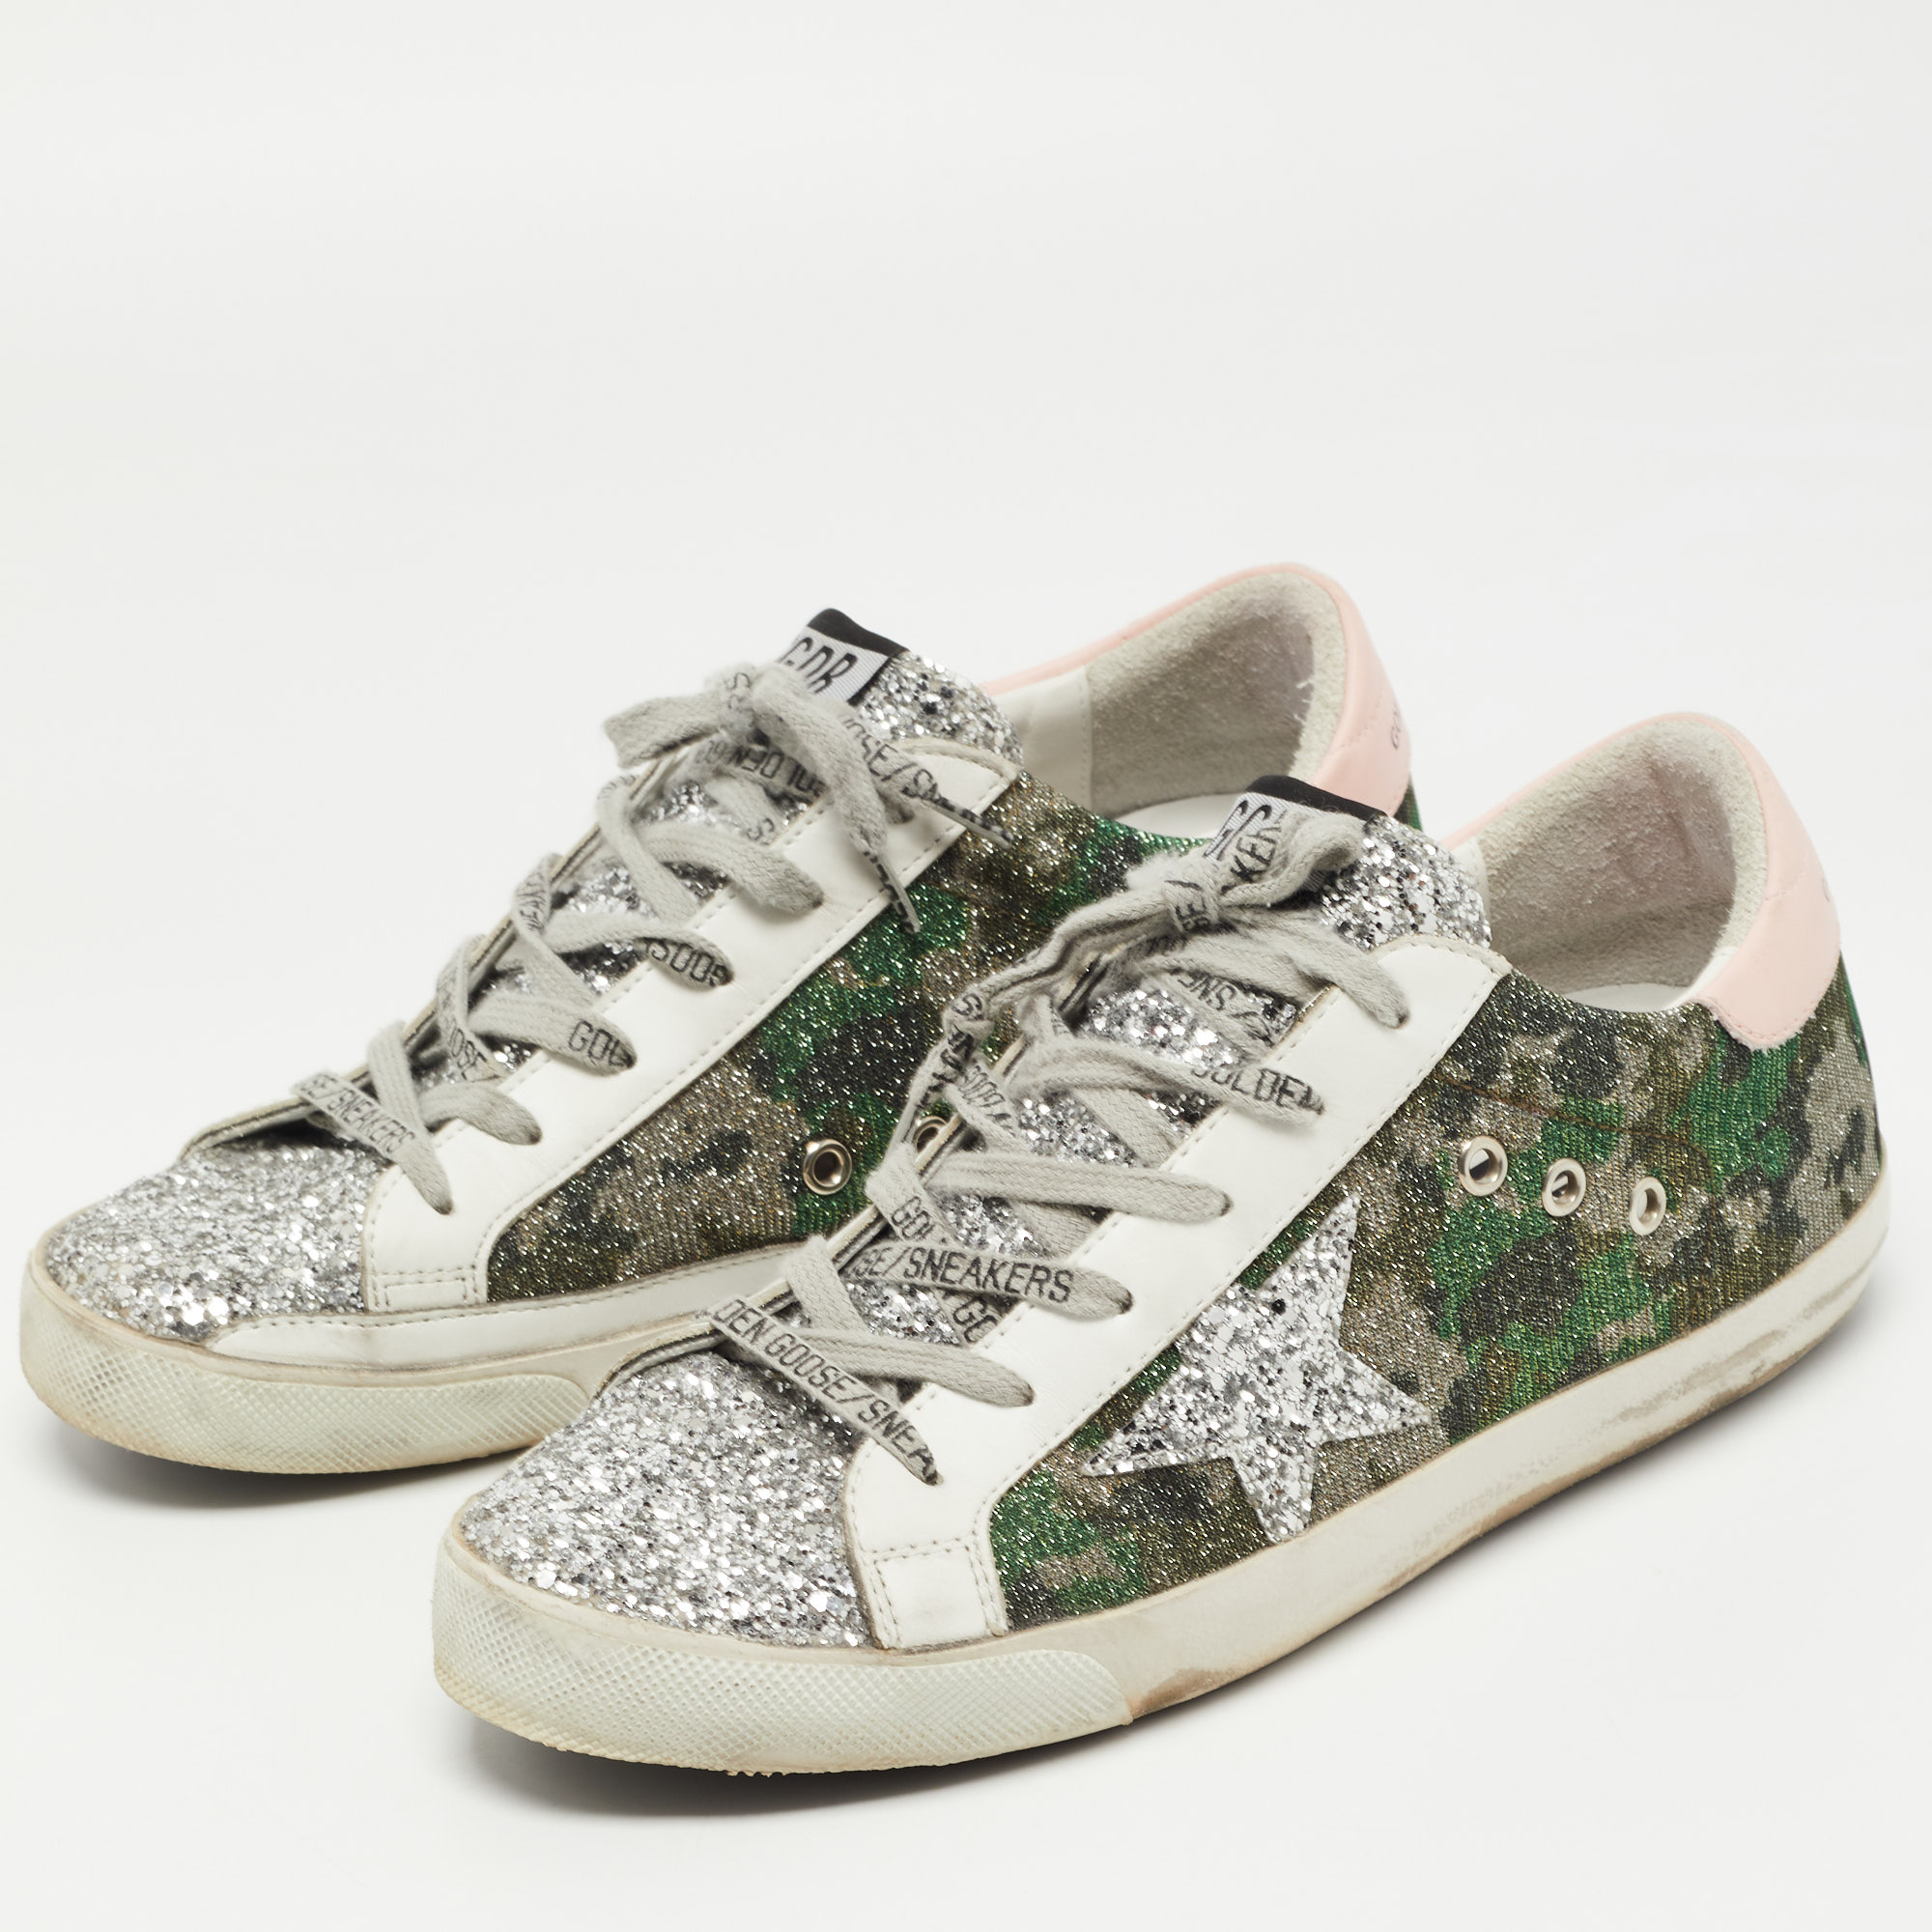 

Golden Goose Multicolor Glitter and Leather Superstar Lace Up Sneakers Size